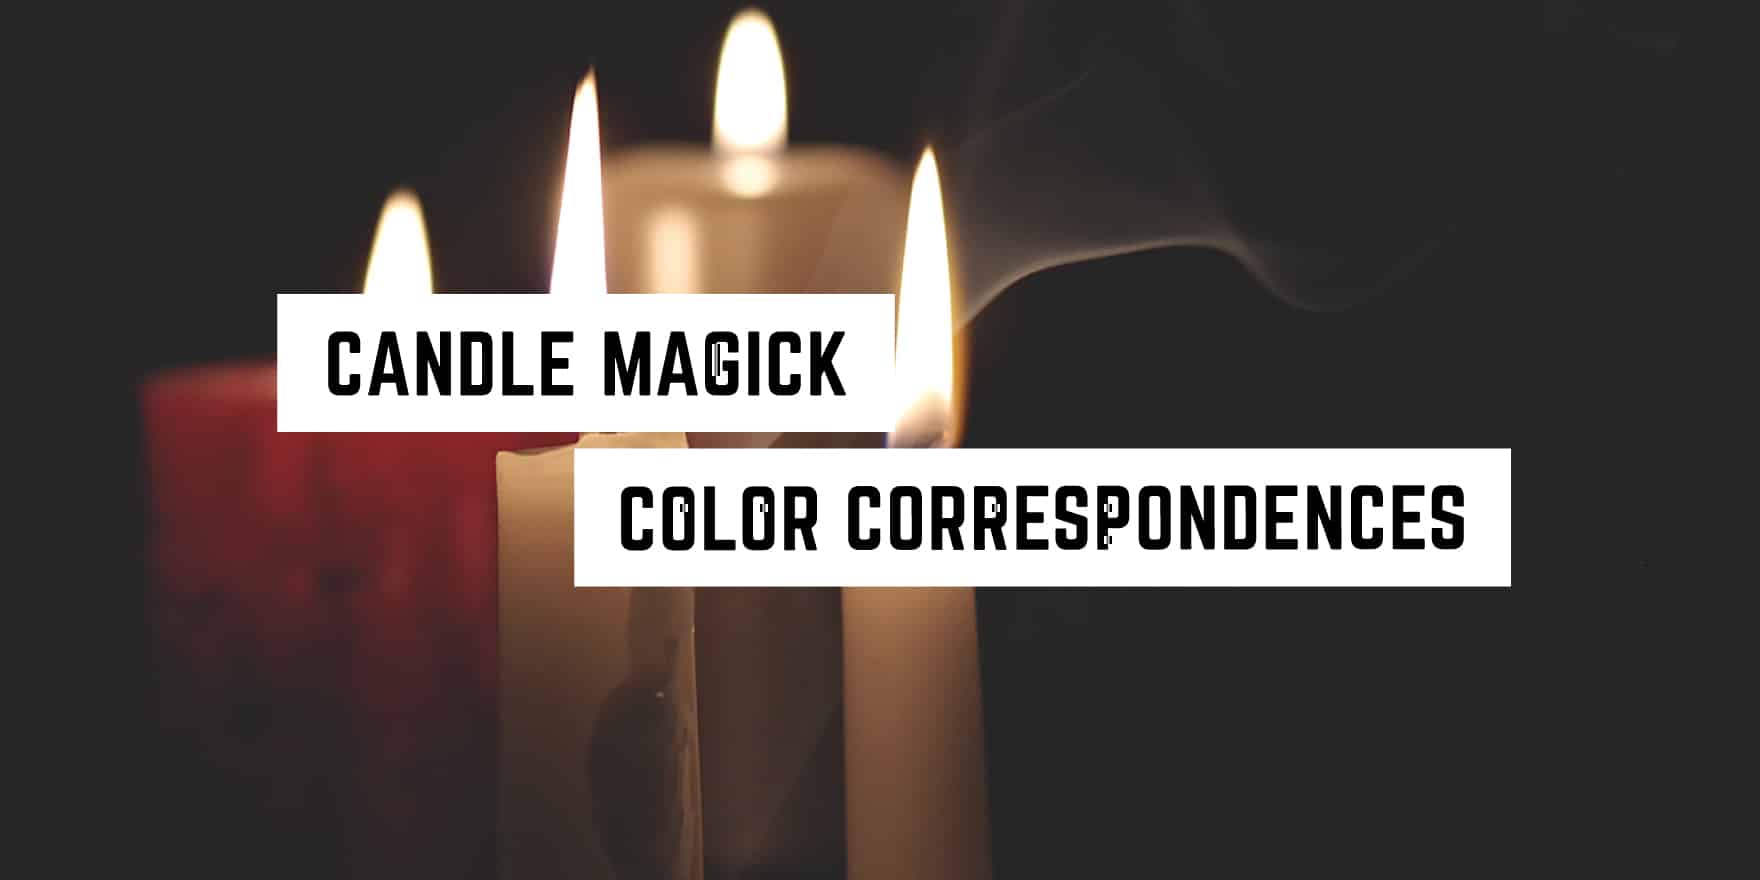 Candle Magick Candle Color Meanings